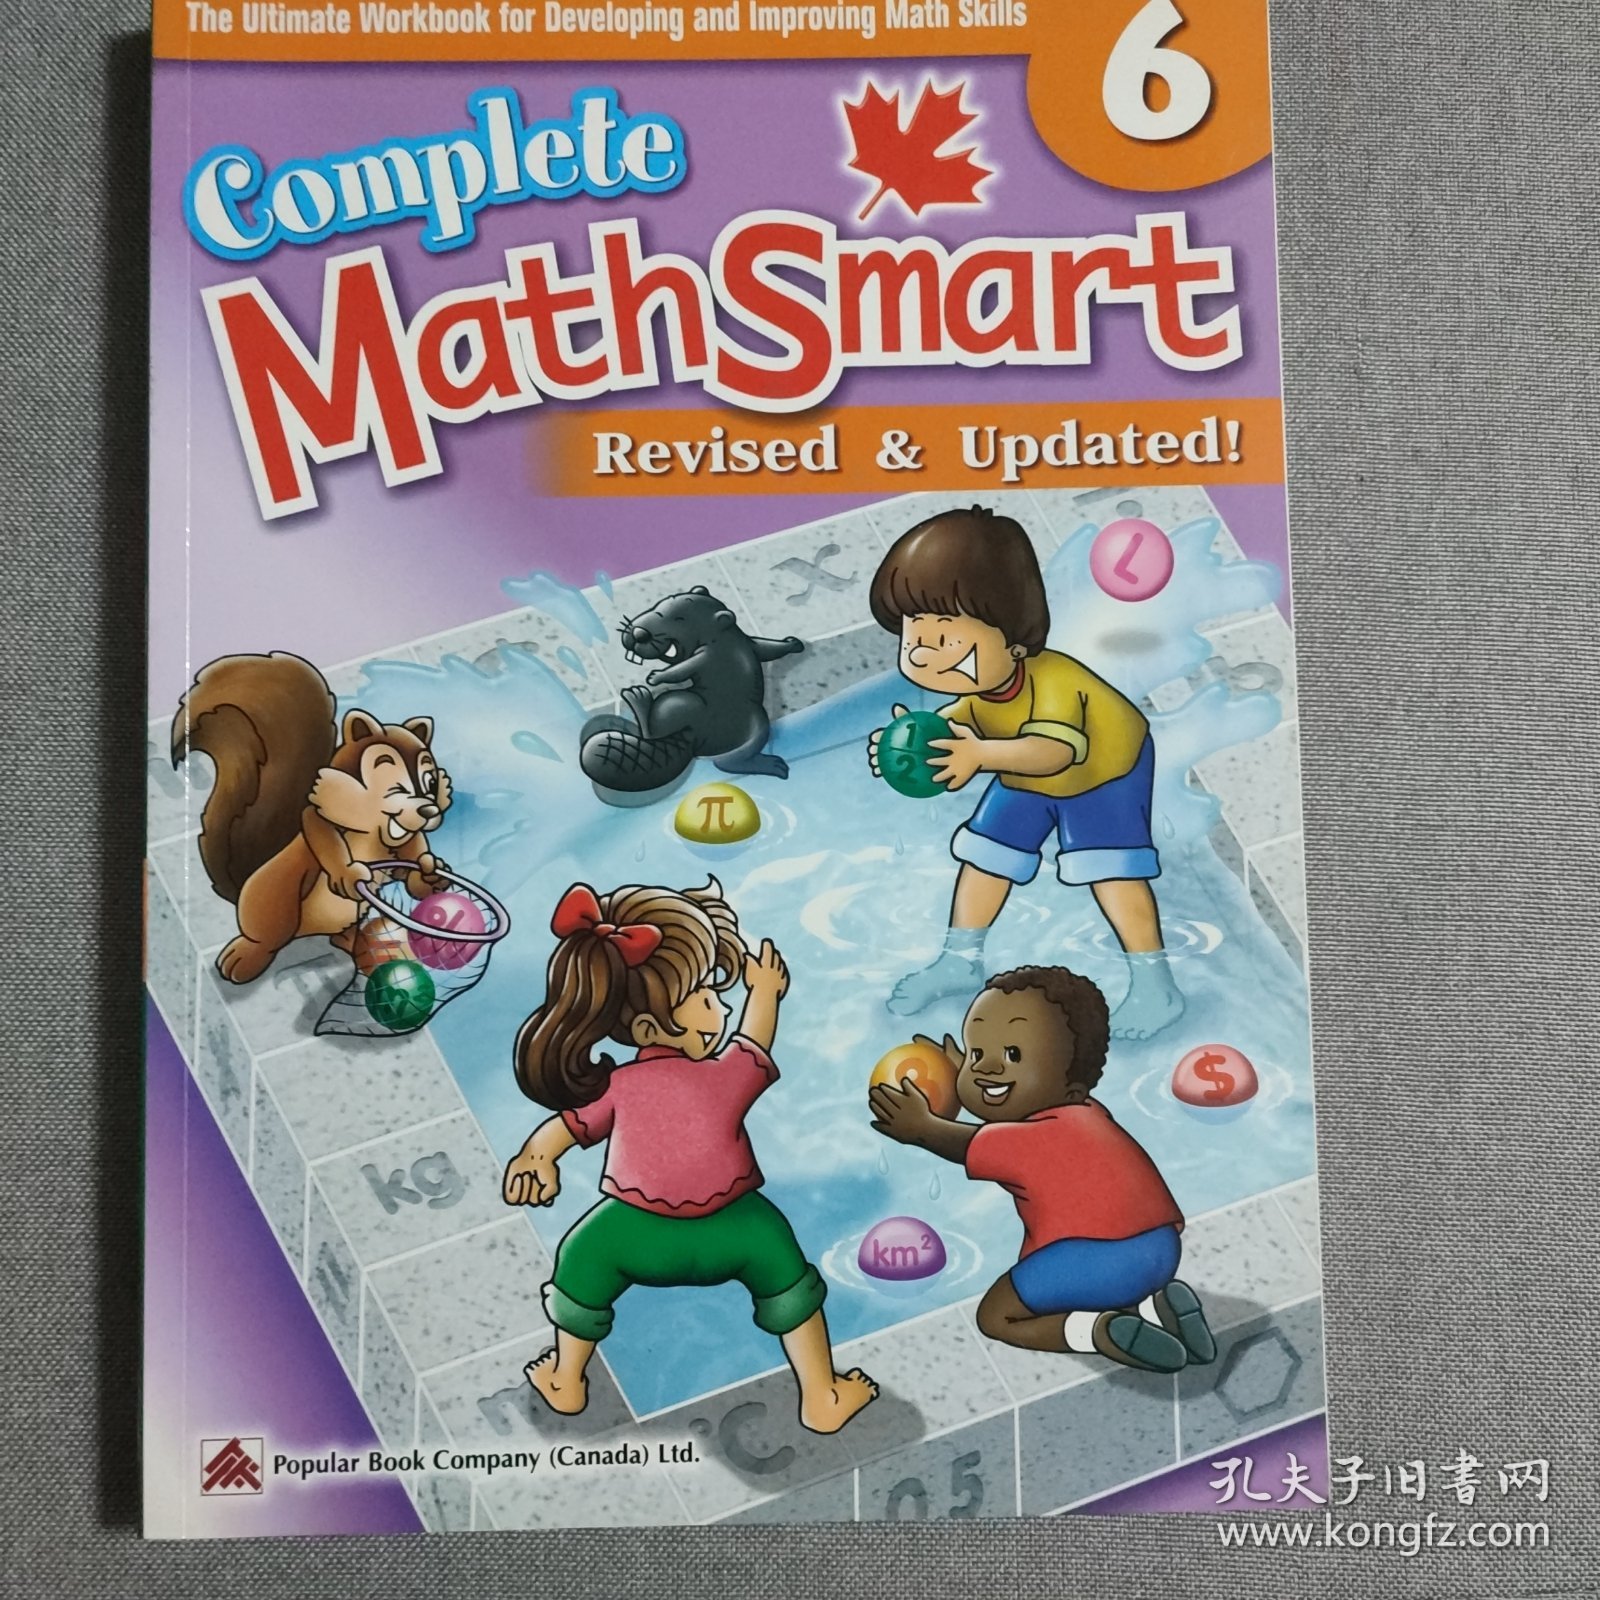 complete math smart 6. revised and updated